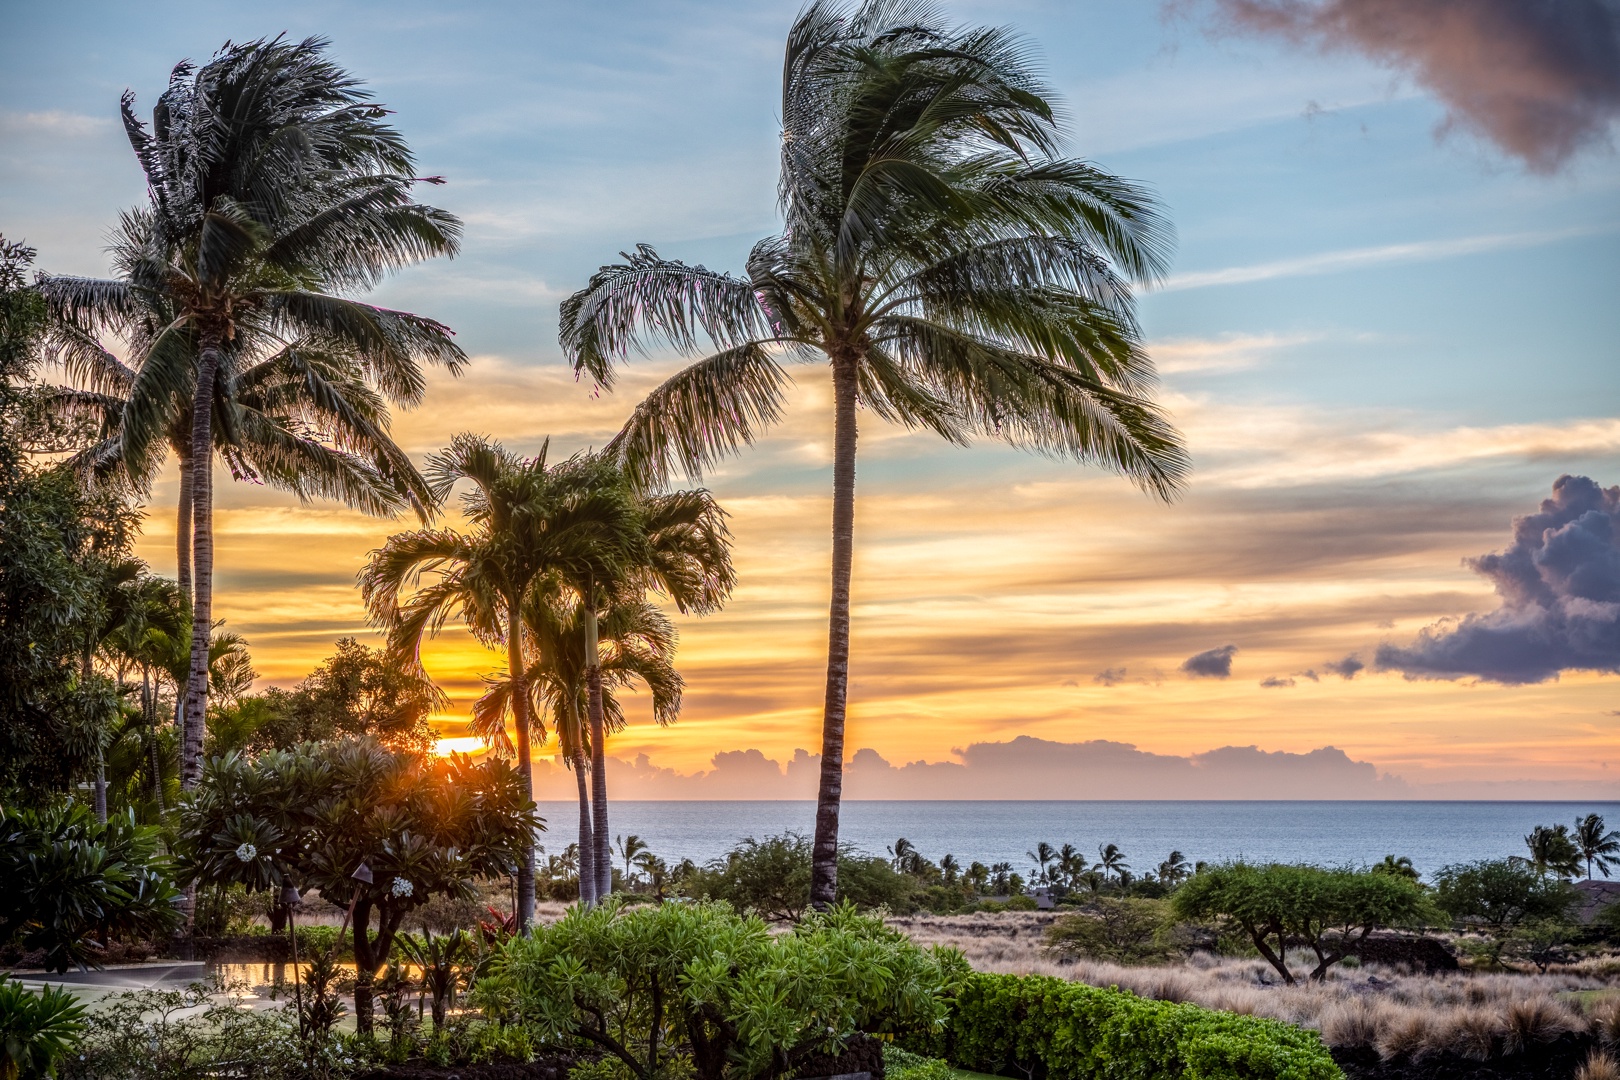 Kailua Kona Vacation Rentals, 4BD Hainoa Estate (122) at Four Seasons Resort at Hualalai - Enjoy breathtaking sunsets from your own private oasis in paradise.